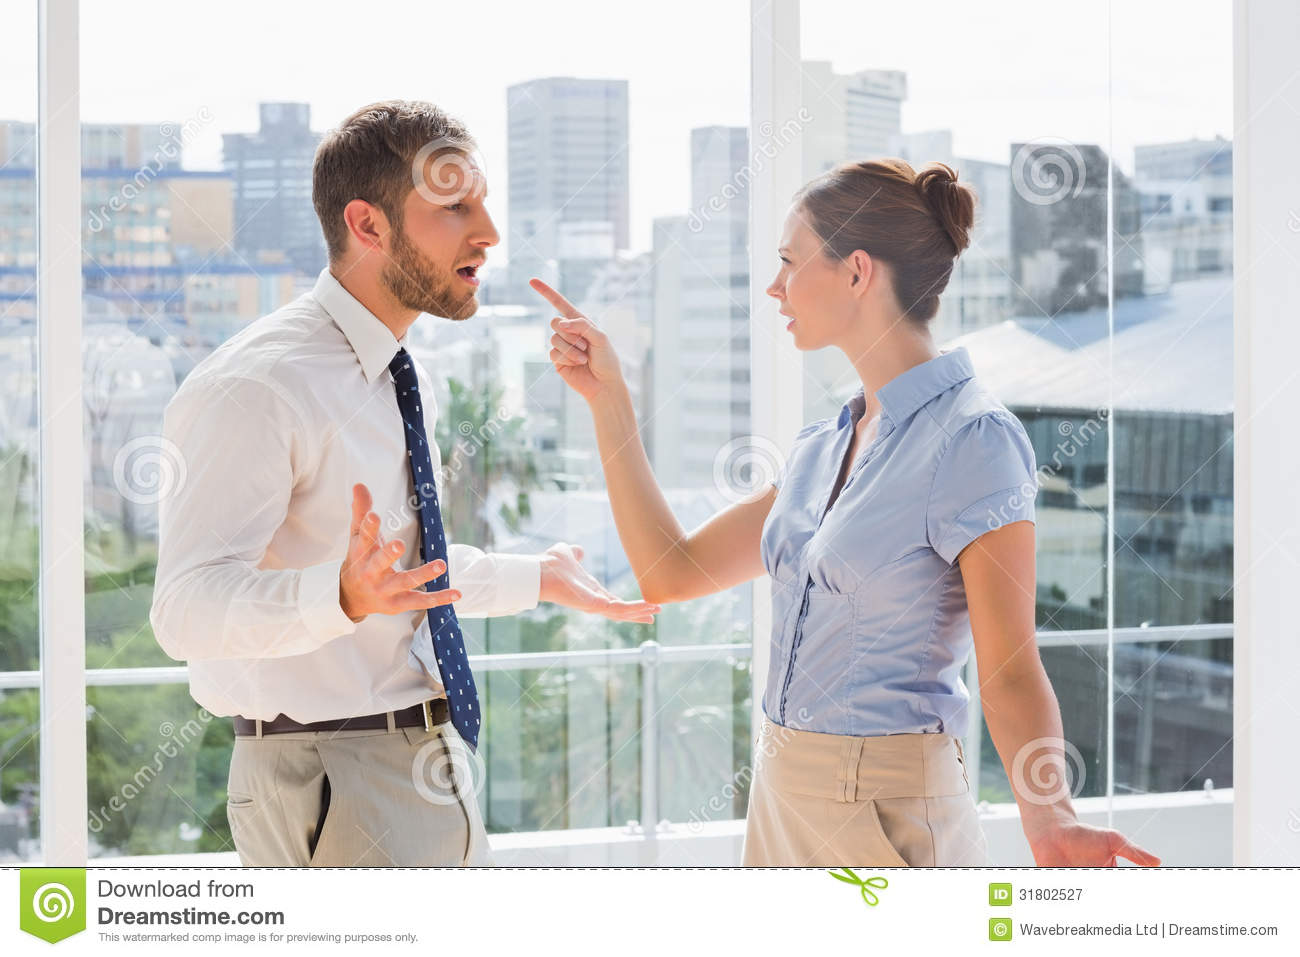 Business Team Having A Heated Argument Royalty Free Stock Photography